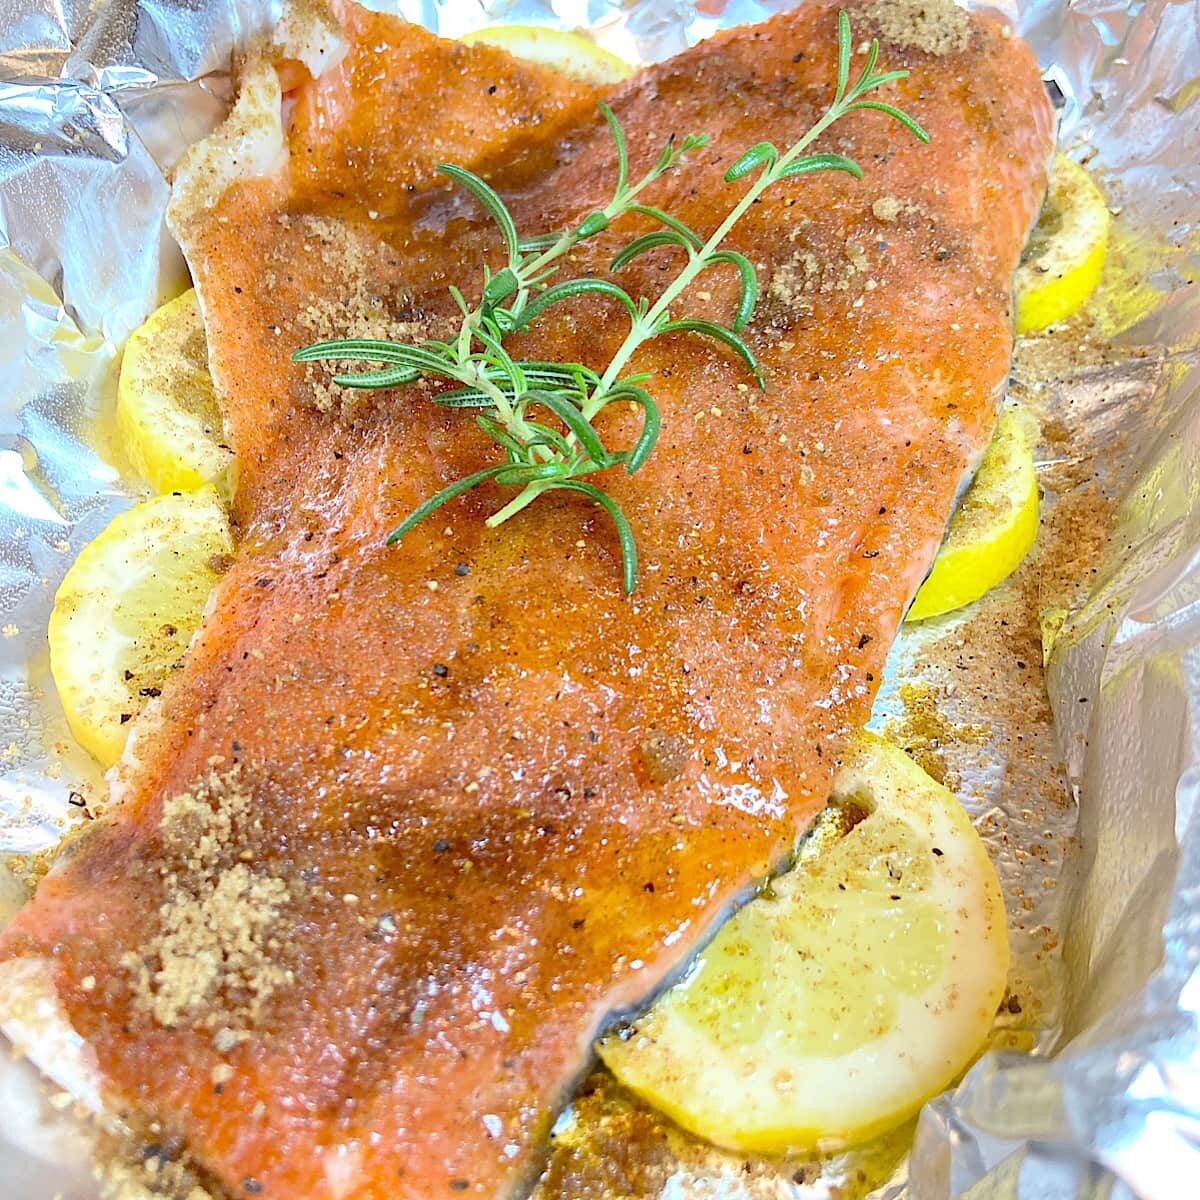 salmon filet on lemon drizzled with olive oil and spices.